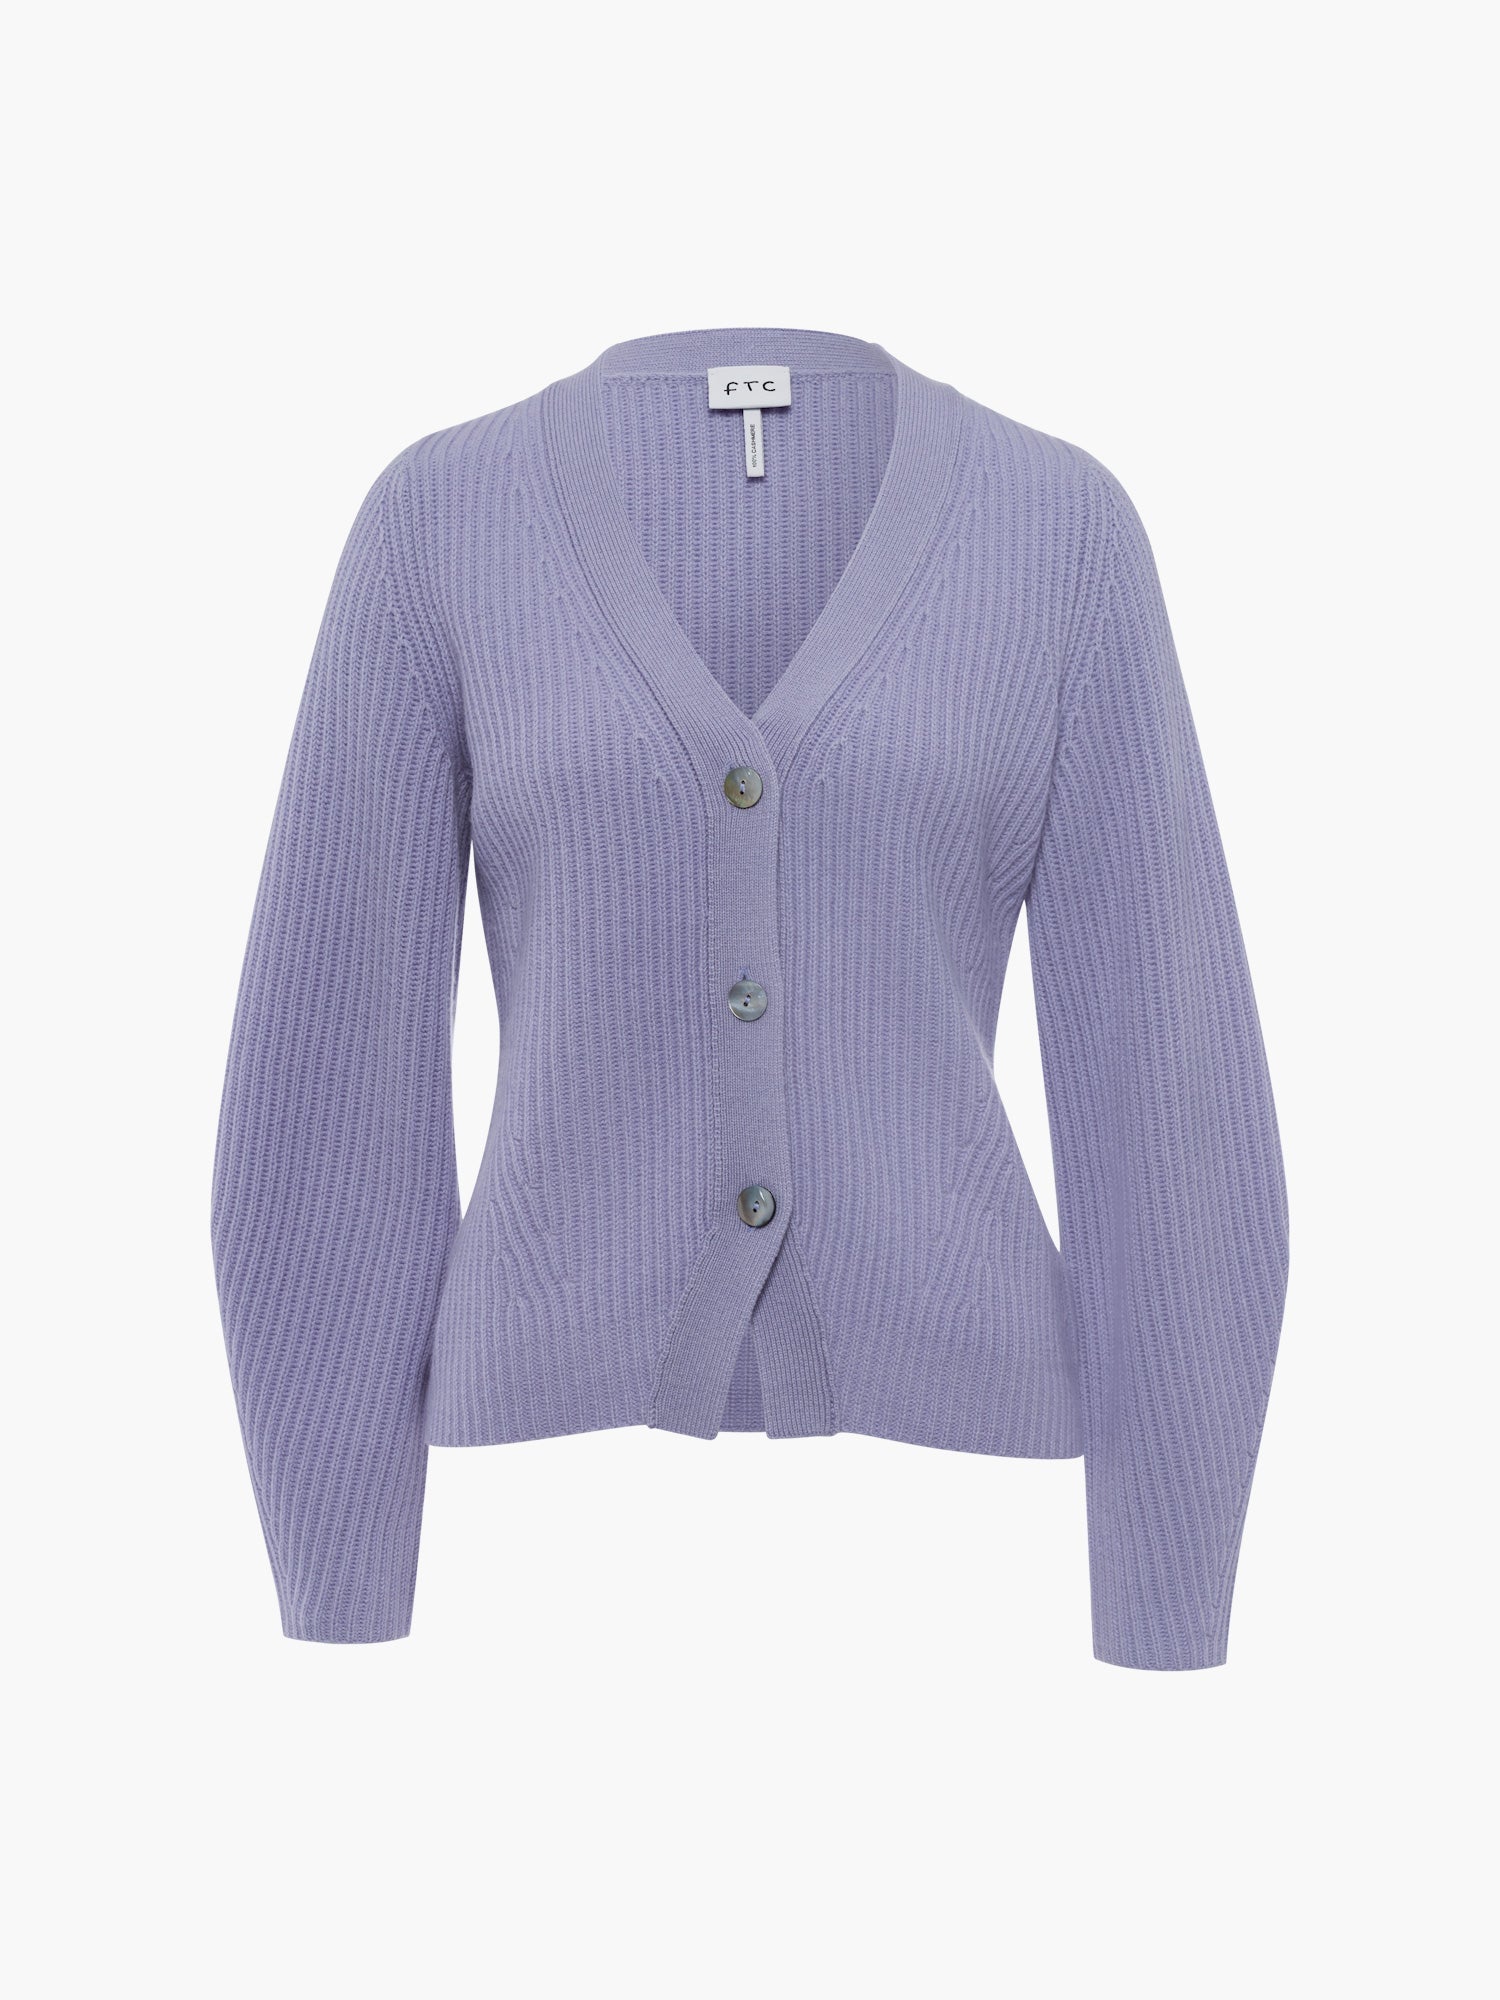 FTC-Cashmere-OUTLET-SALE-Cardigan-VN-Strick-ARCHIVE-COLLECTION_97401550-d61c-4167-9e97-22ddee75e398.jpg